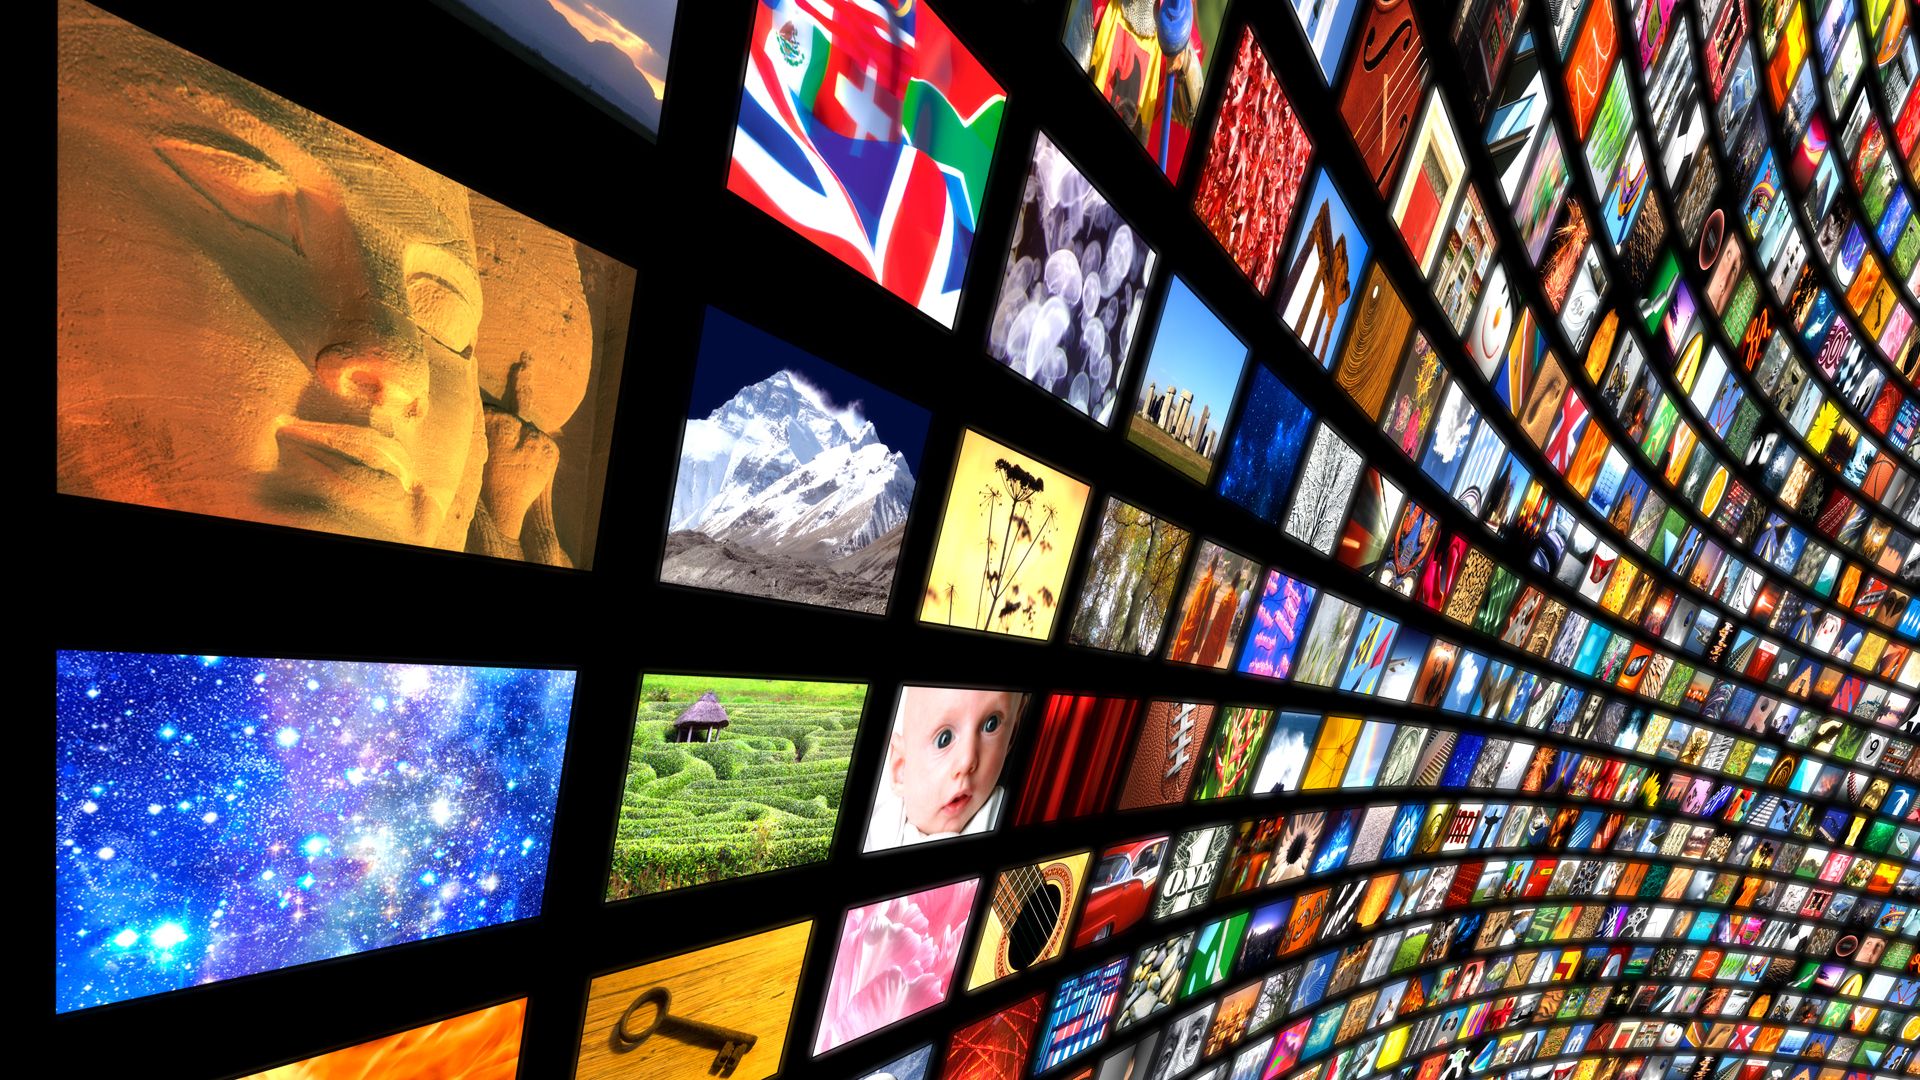 New generation telecom launches large-scale testing of IPTV

